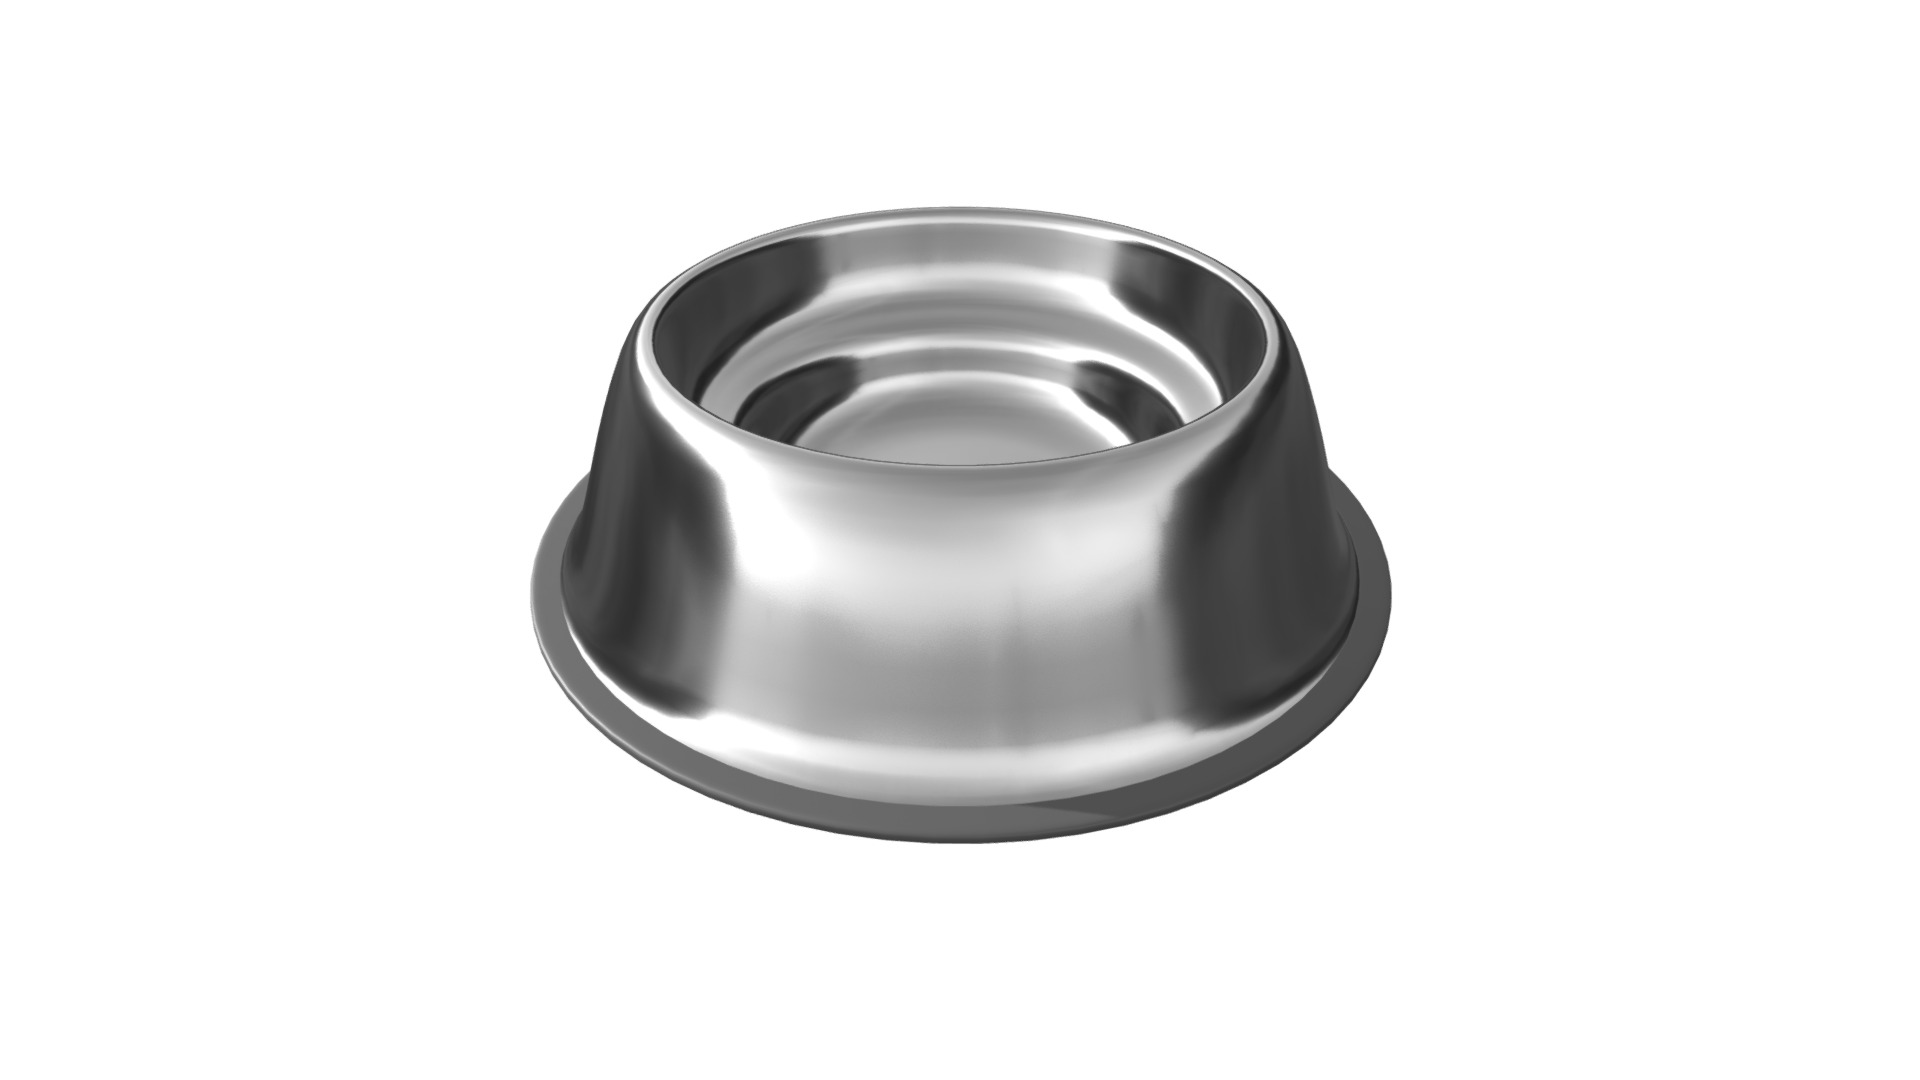 3D model Dog food bowl empty - This is a 3D model of the Dog food bowl empty. The 3D model is about a silver ring with a black band.